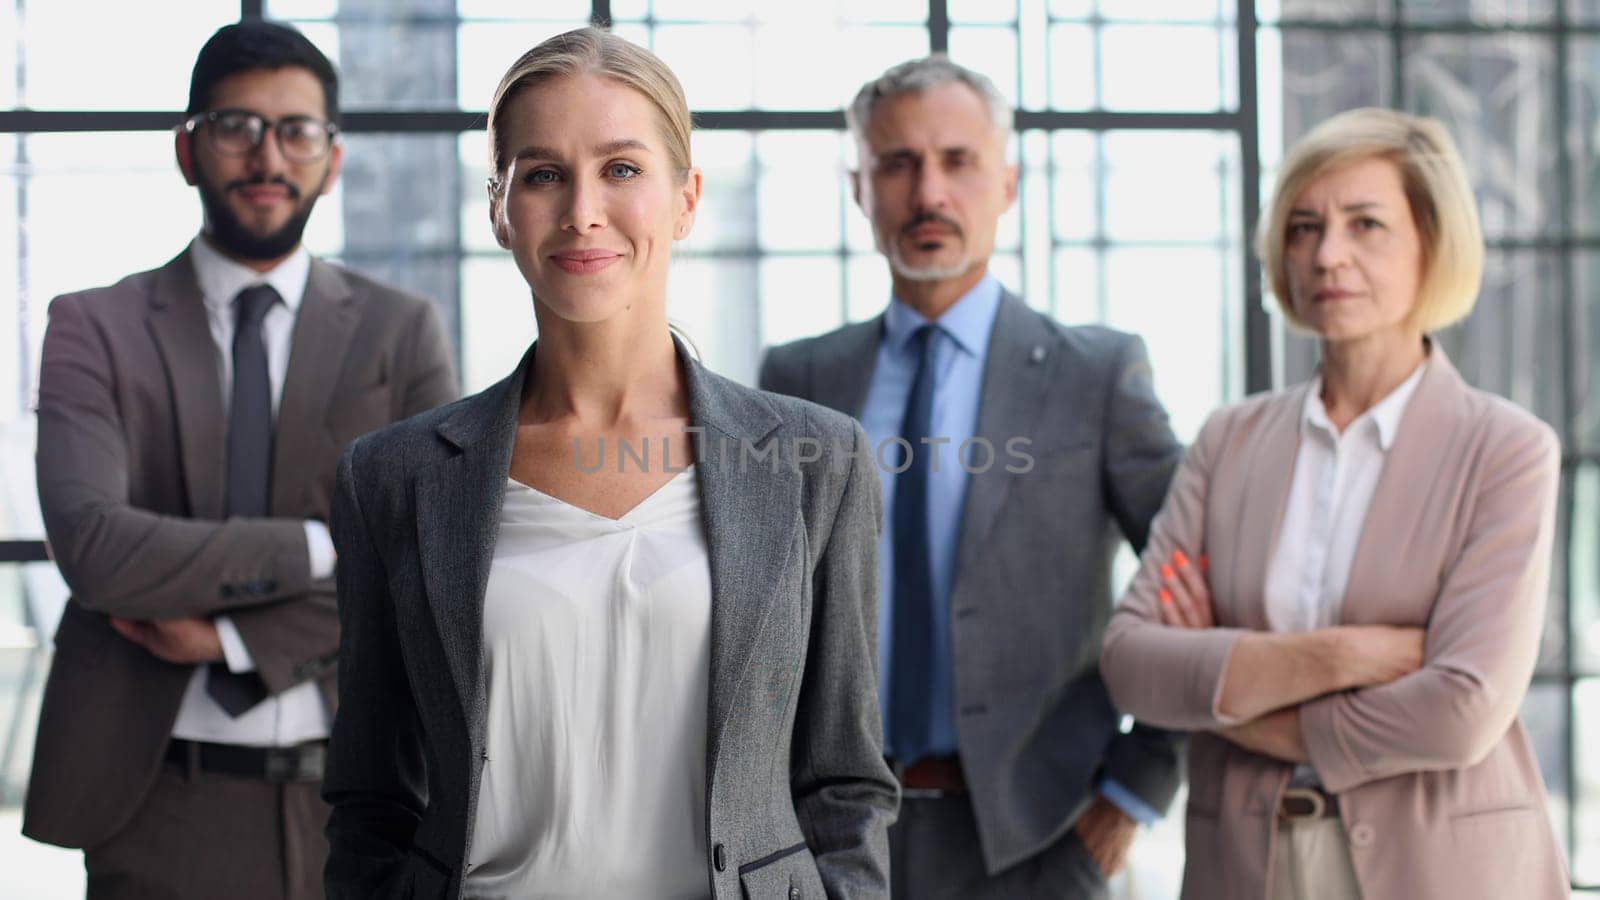 Confident leader. Attractive young woman holding arms crossed and smiling while group of people standing behind her